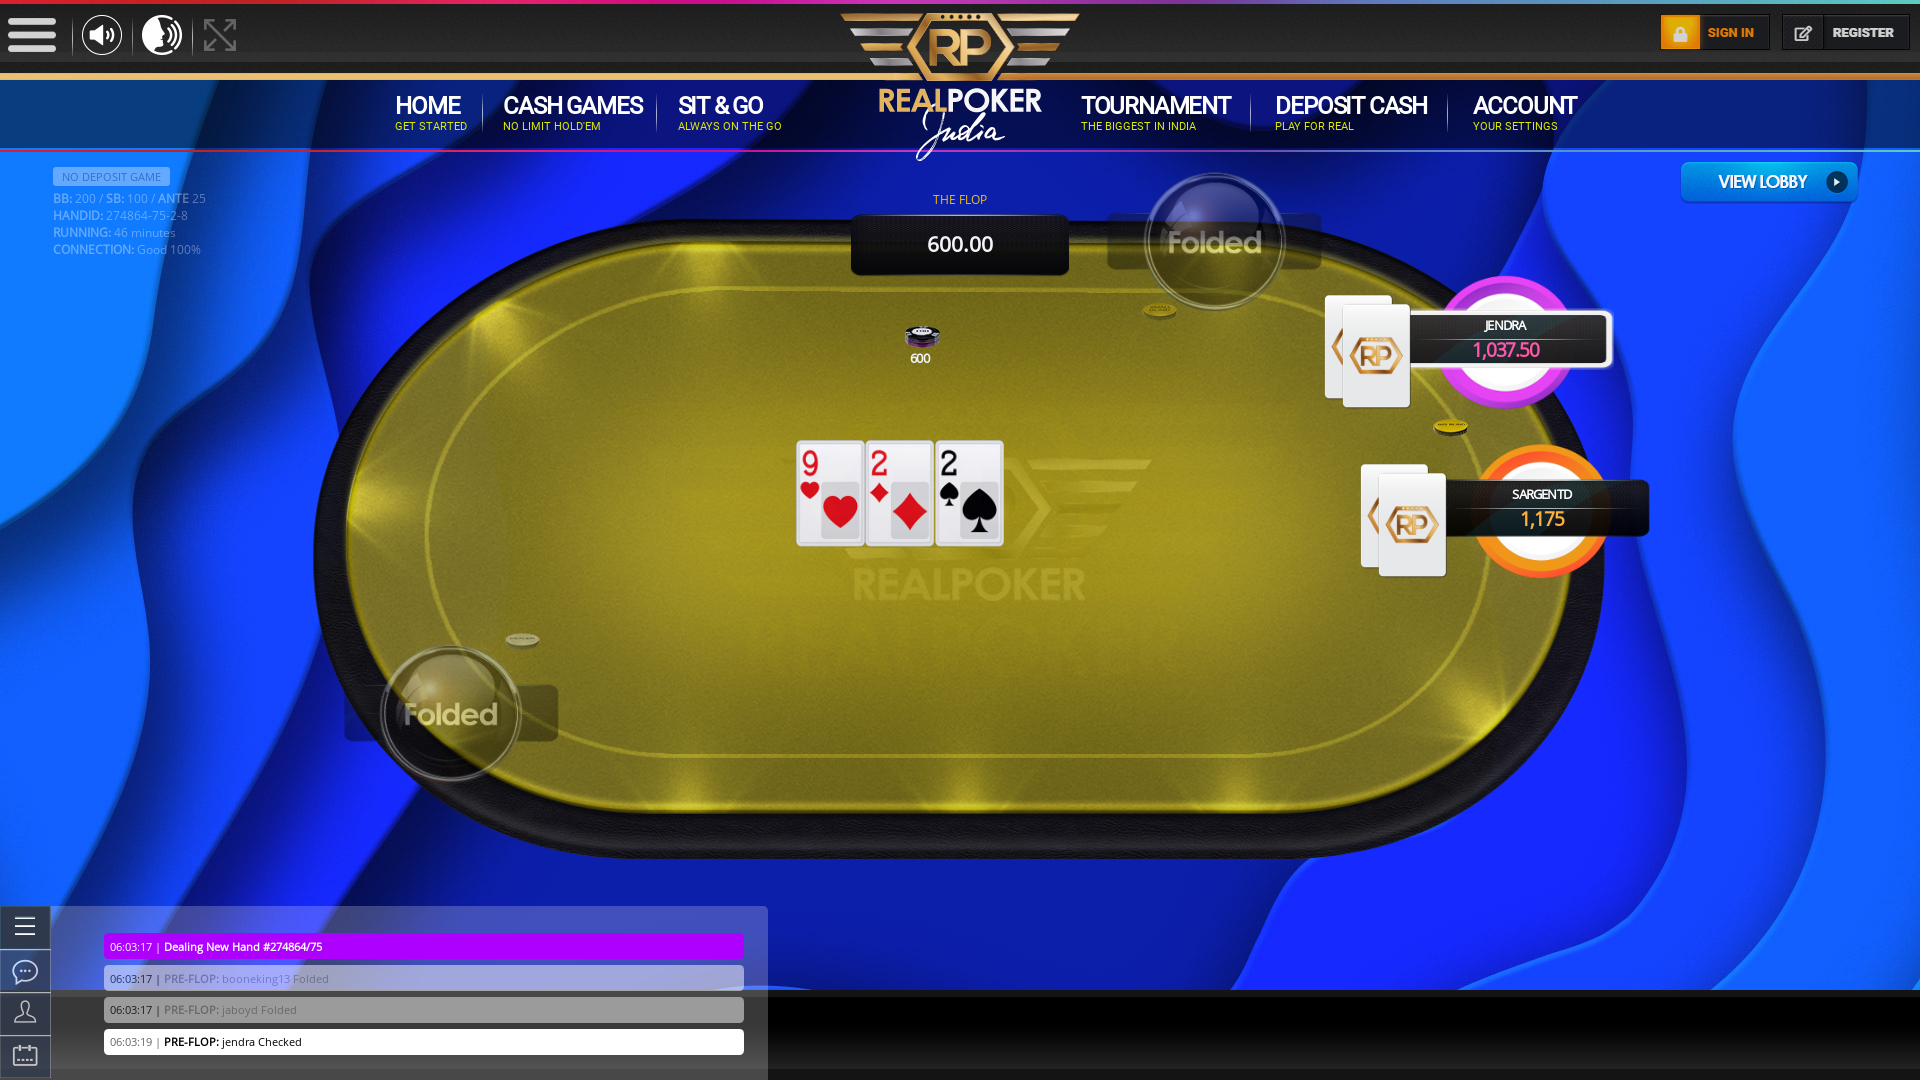 Online poker on a 10 player table in the 45th minute match up